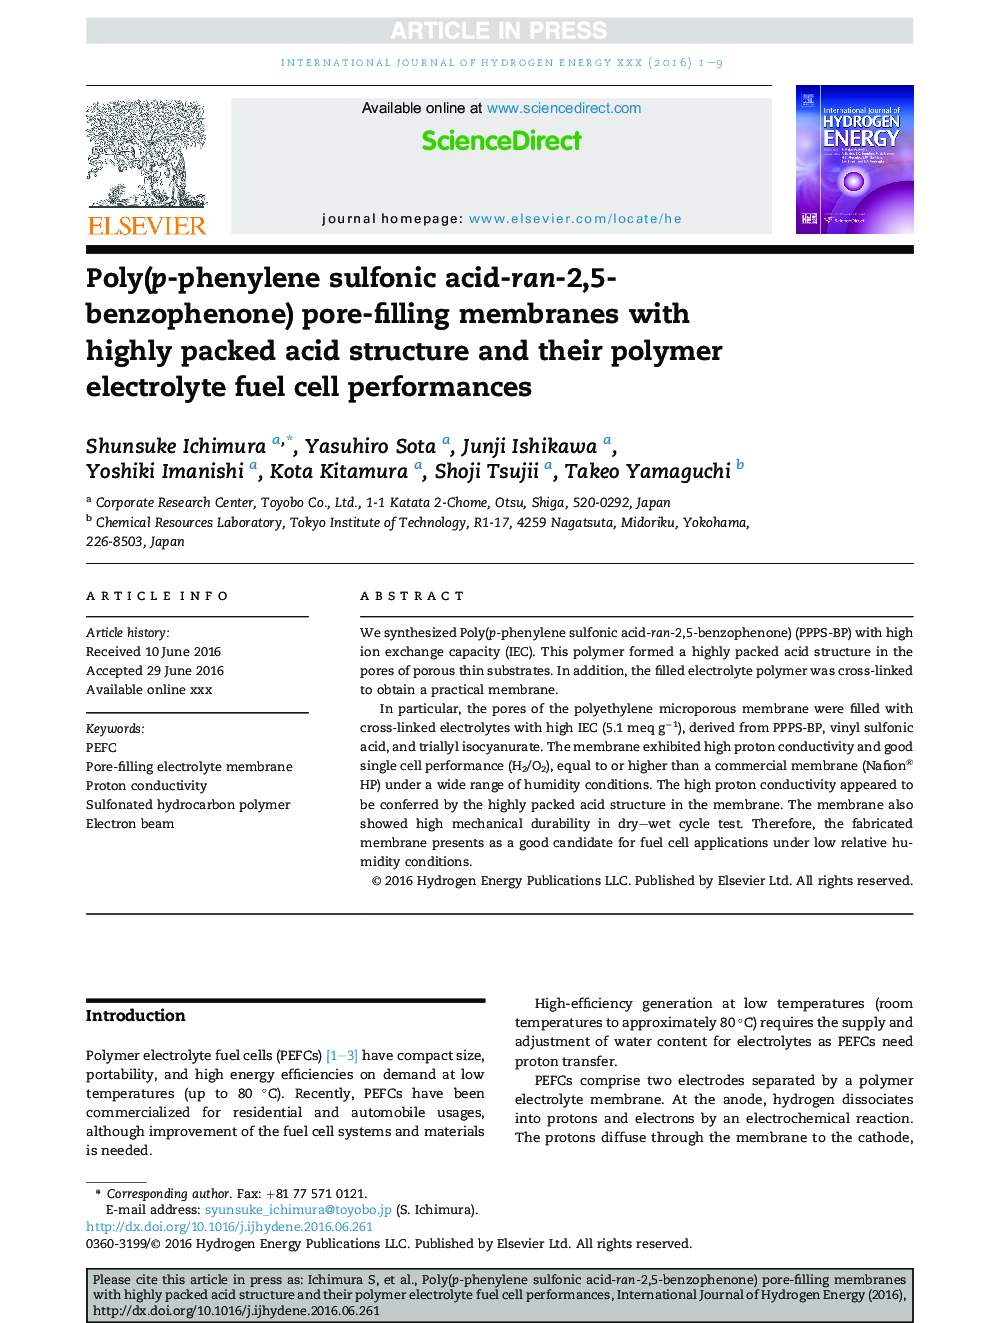 Poly(p-phenylene sulfonicÂ acid-ran-2,5-benzophenone) pore-filling membranes with highly packed acid structure and their polymer electrolyte fuel cell performances